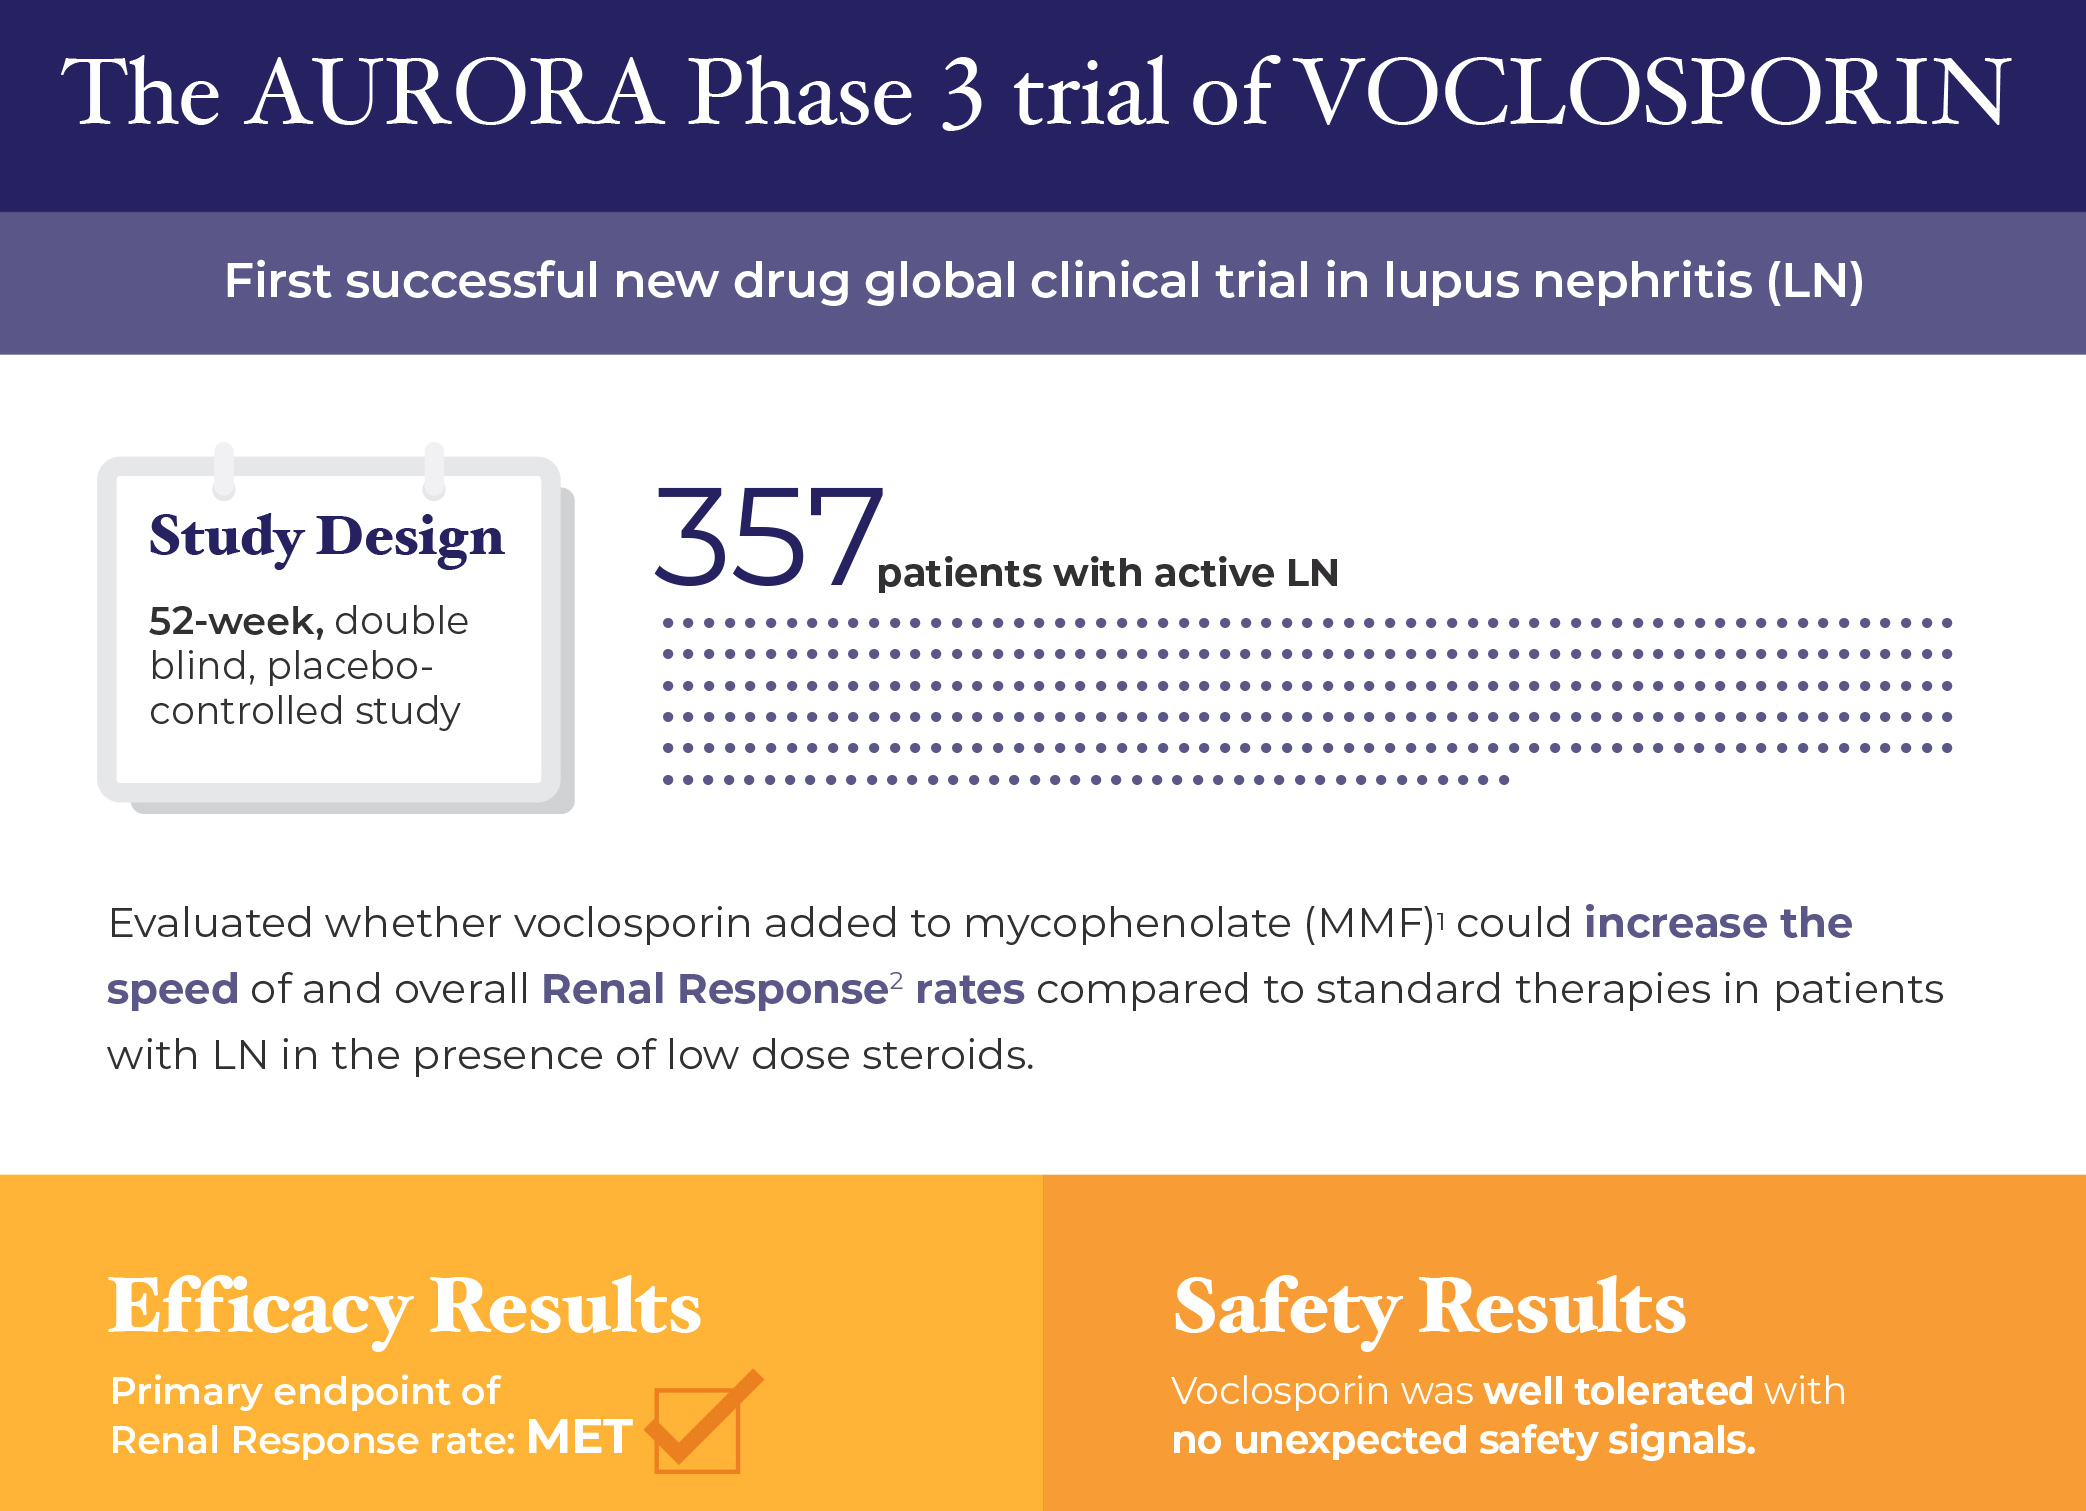 Clinical Trial Results